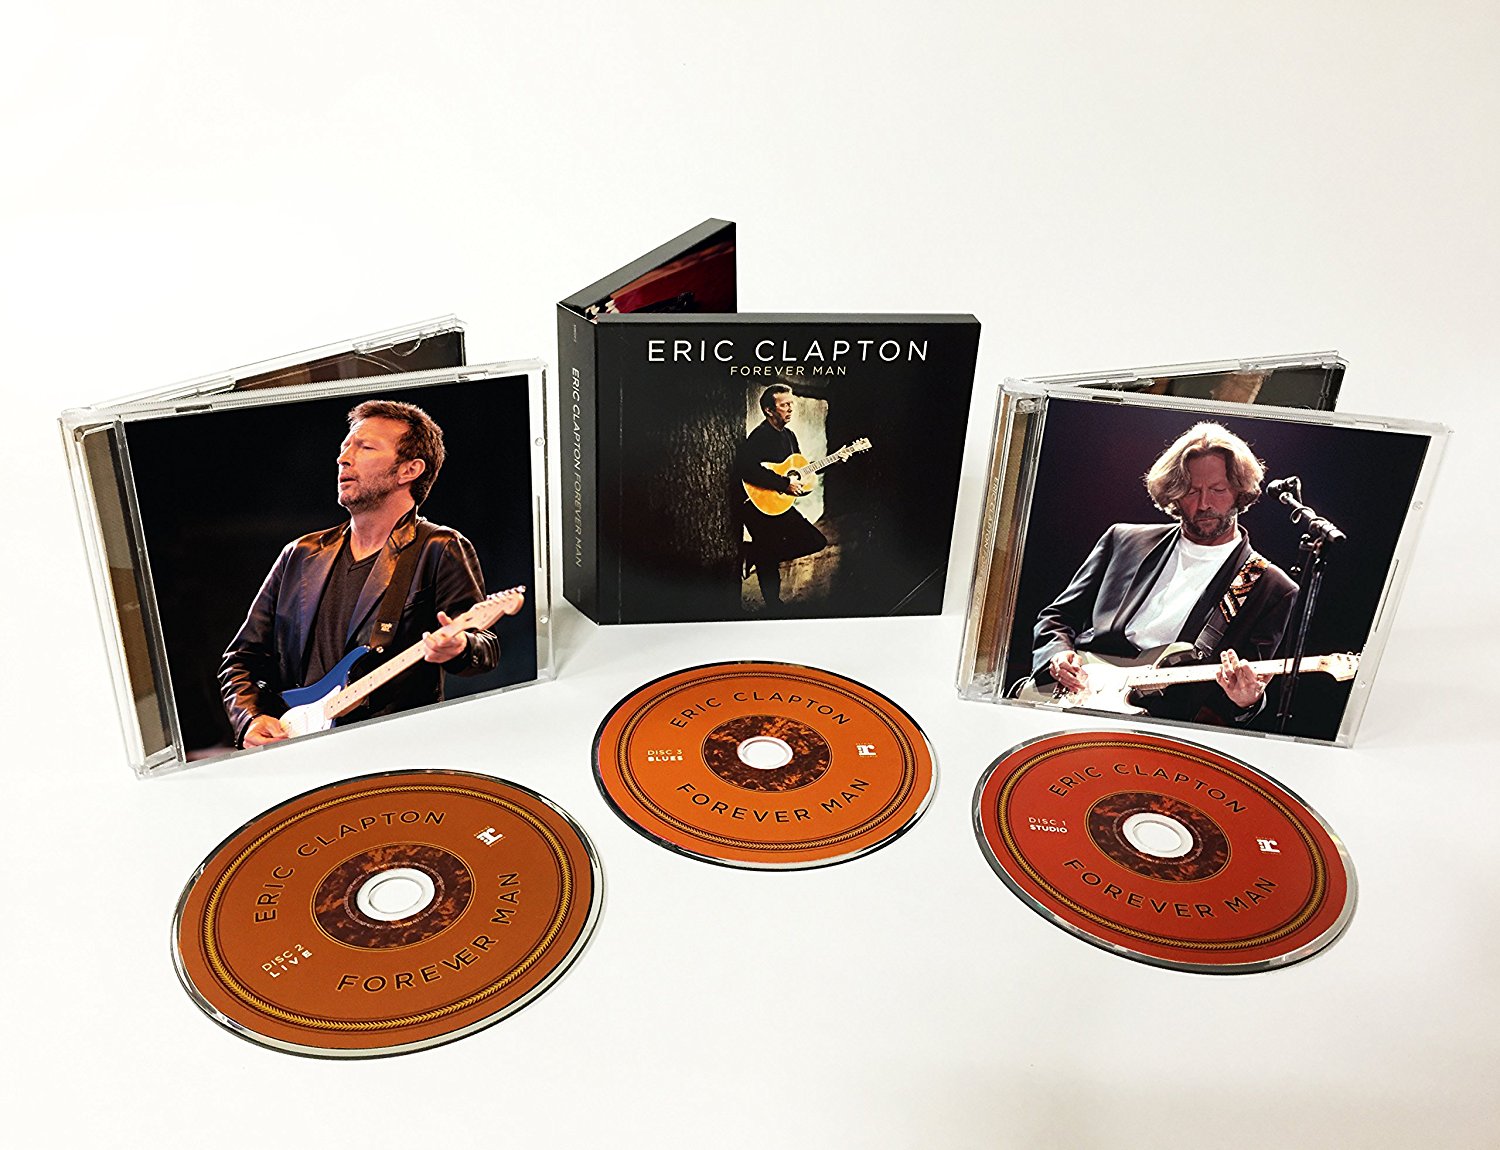 Forever Man - Deluxe Edition - Box set | Eric Clapton